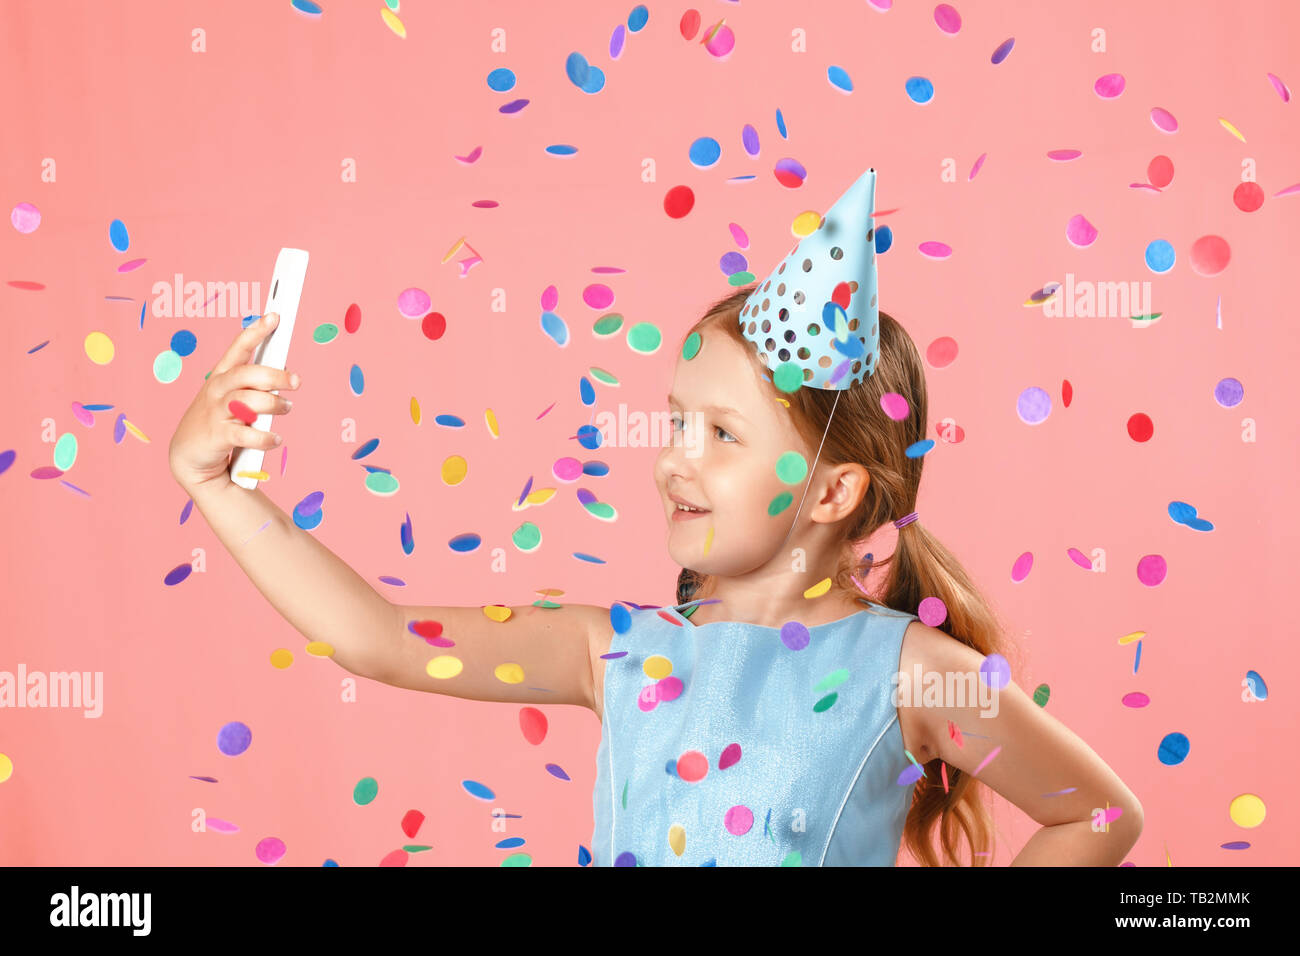 Cheerful little girl celebrates birthday. The child holds the phone, takes a selfie in the rain of confetti. Closeup portrait on pink background. Stock Photo